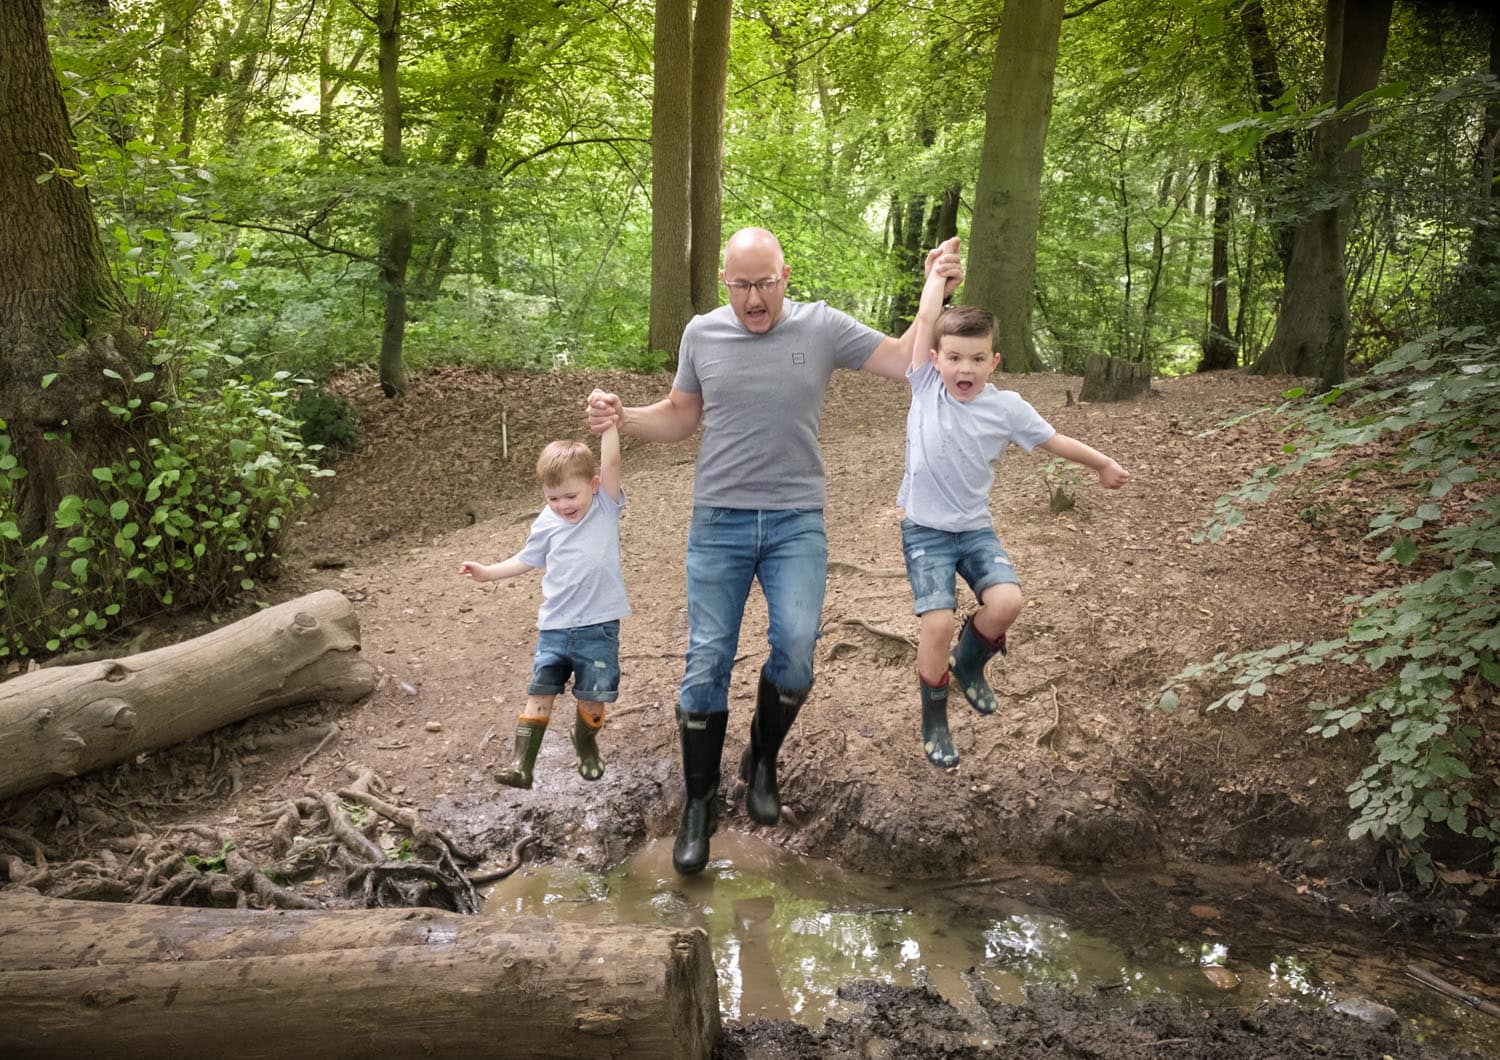 Family photography in the woods in Warwickshire